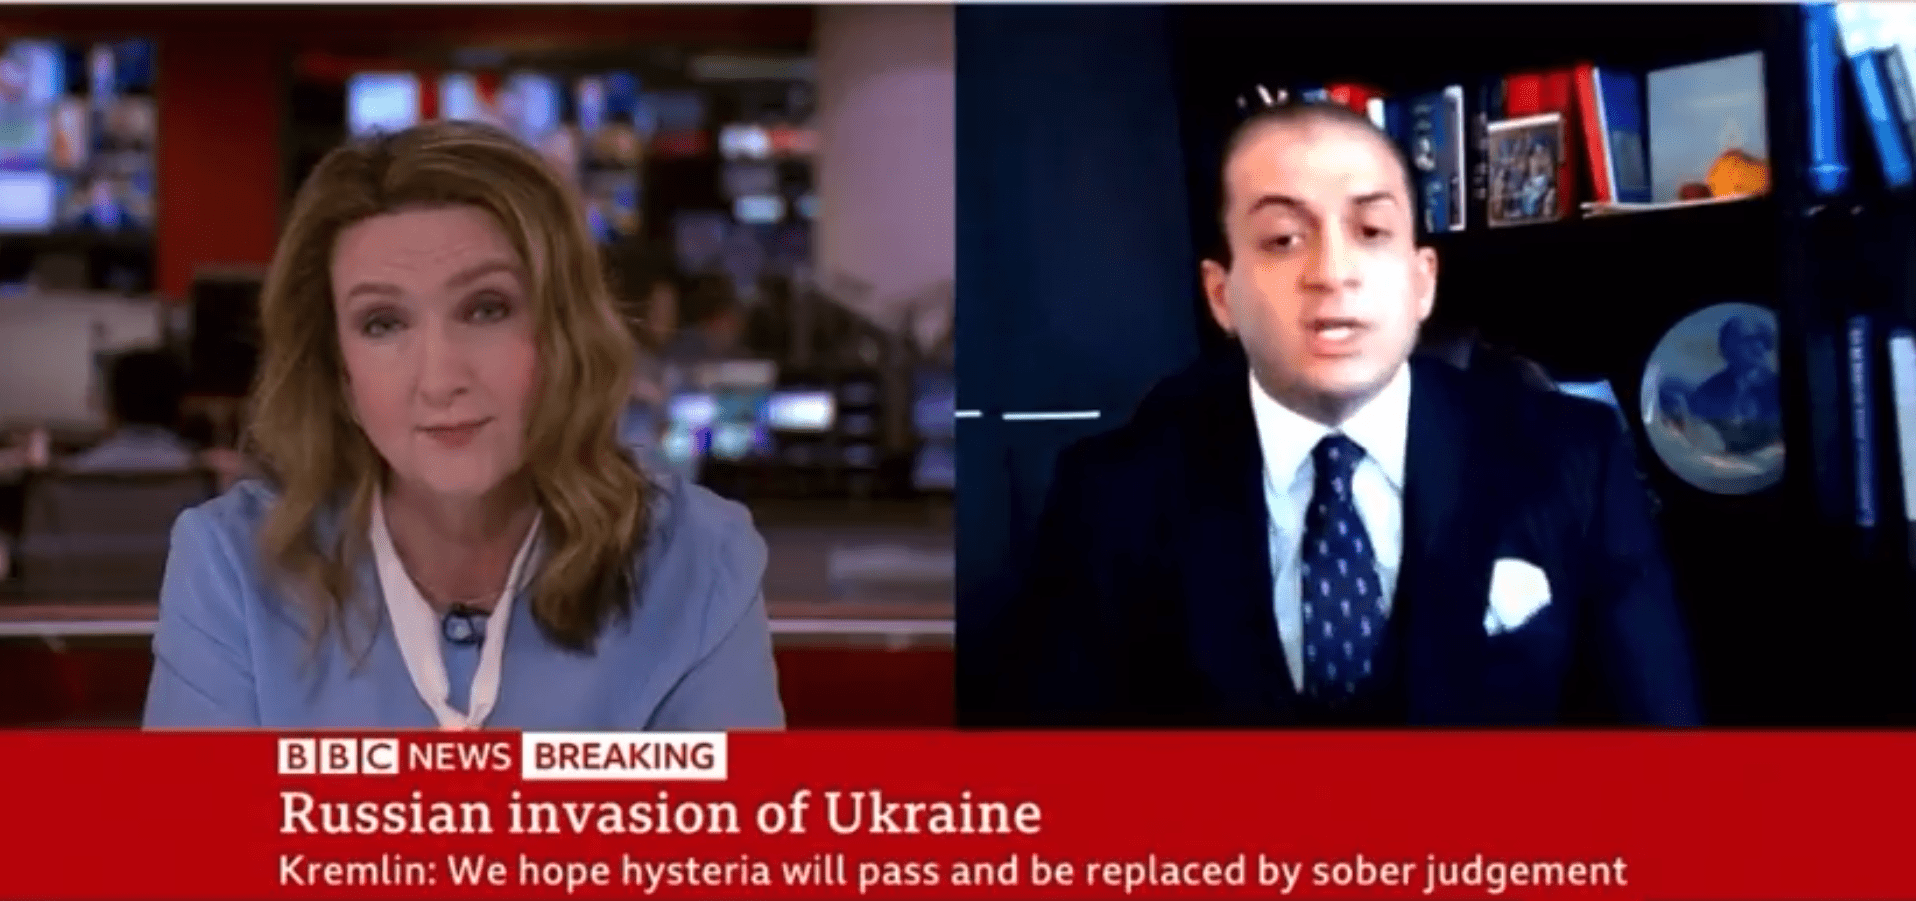 ‘This is nonsense’: Victoria Derbyshire calls out Putin supporter live on BBC